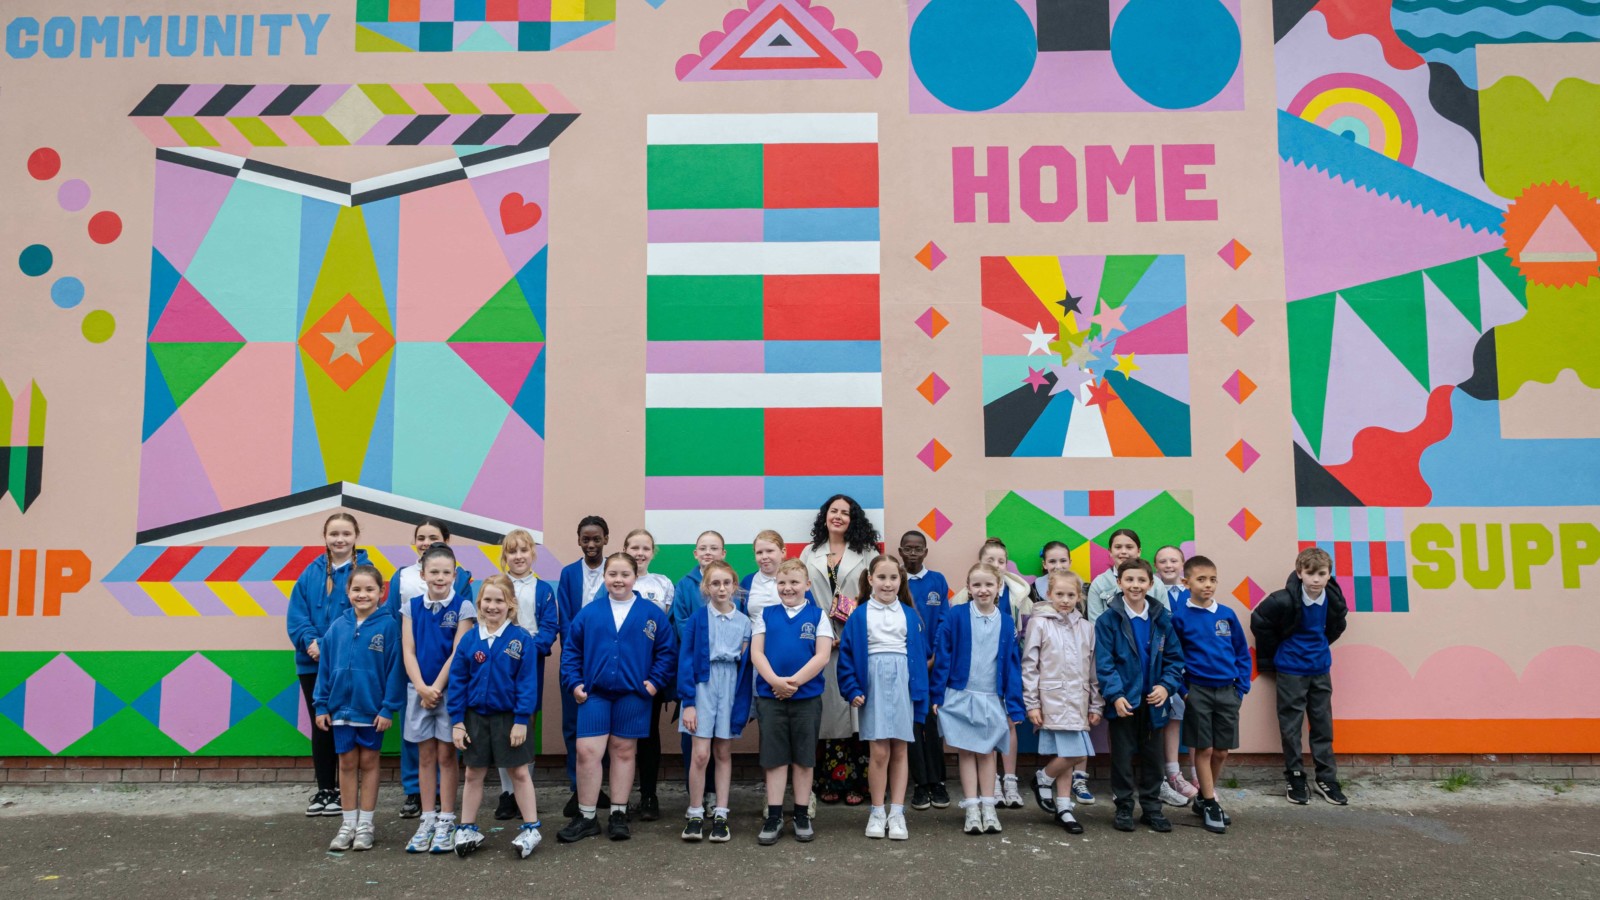 The schoolchildren stand in front of the mural with Cherie smiling at the camera. The mural is made up of vibrant, geometric shapes and patterns, with words such as ‘Home’, ‘Friendship’ and ‘Community’ on it.